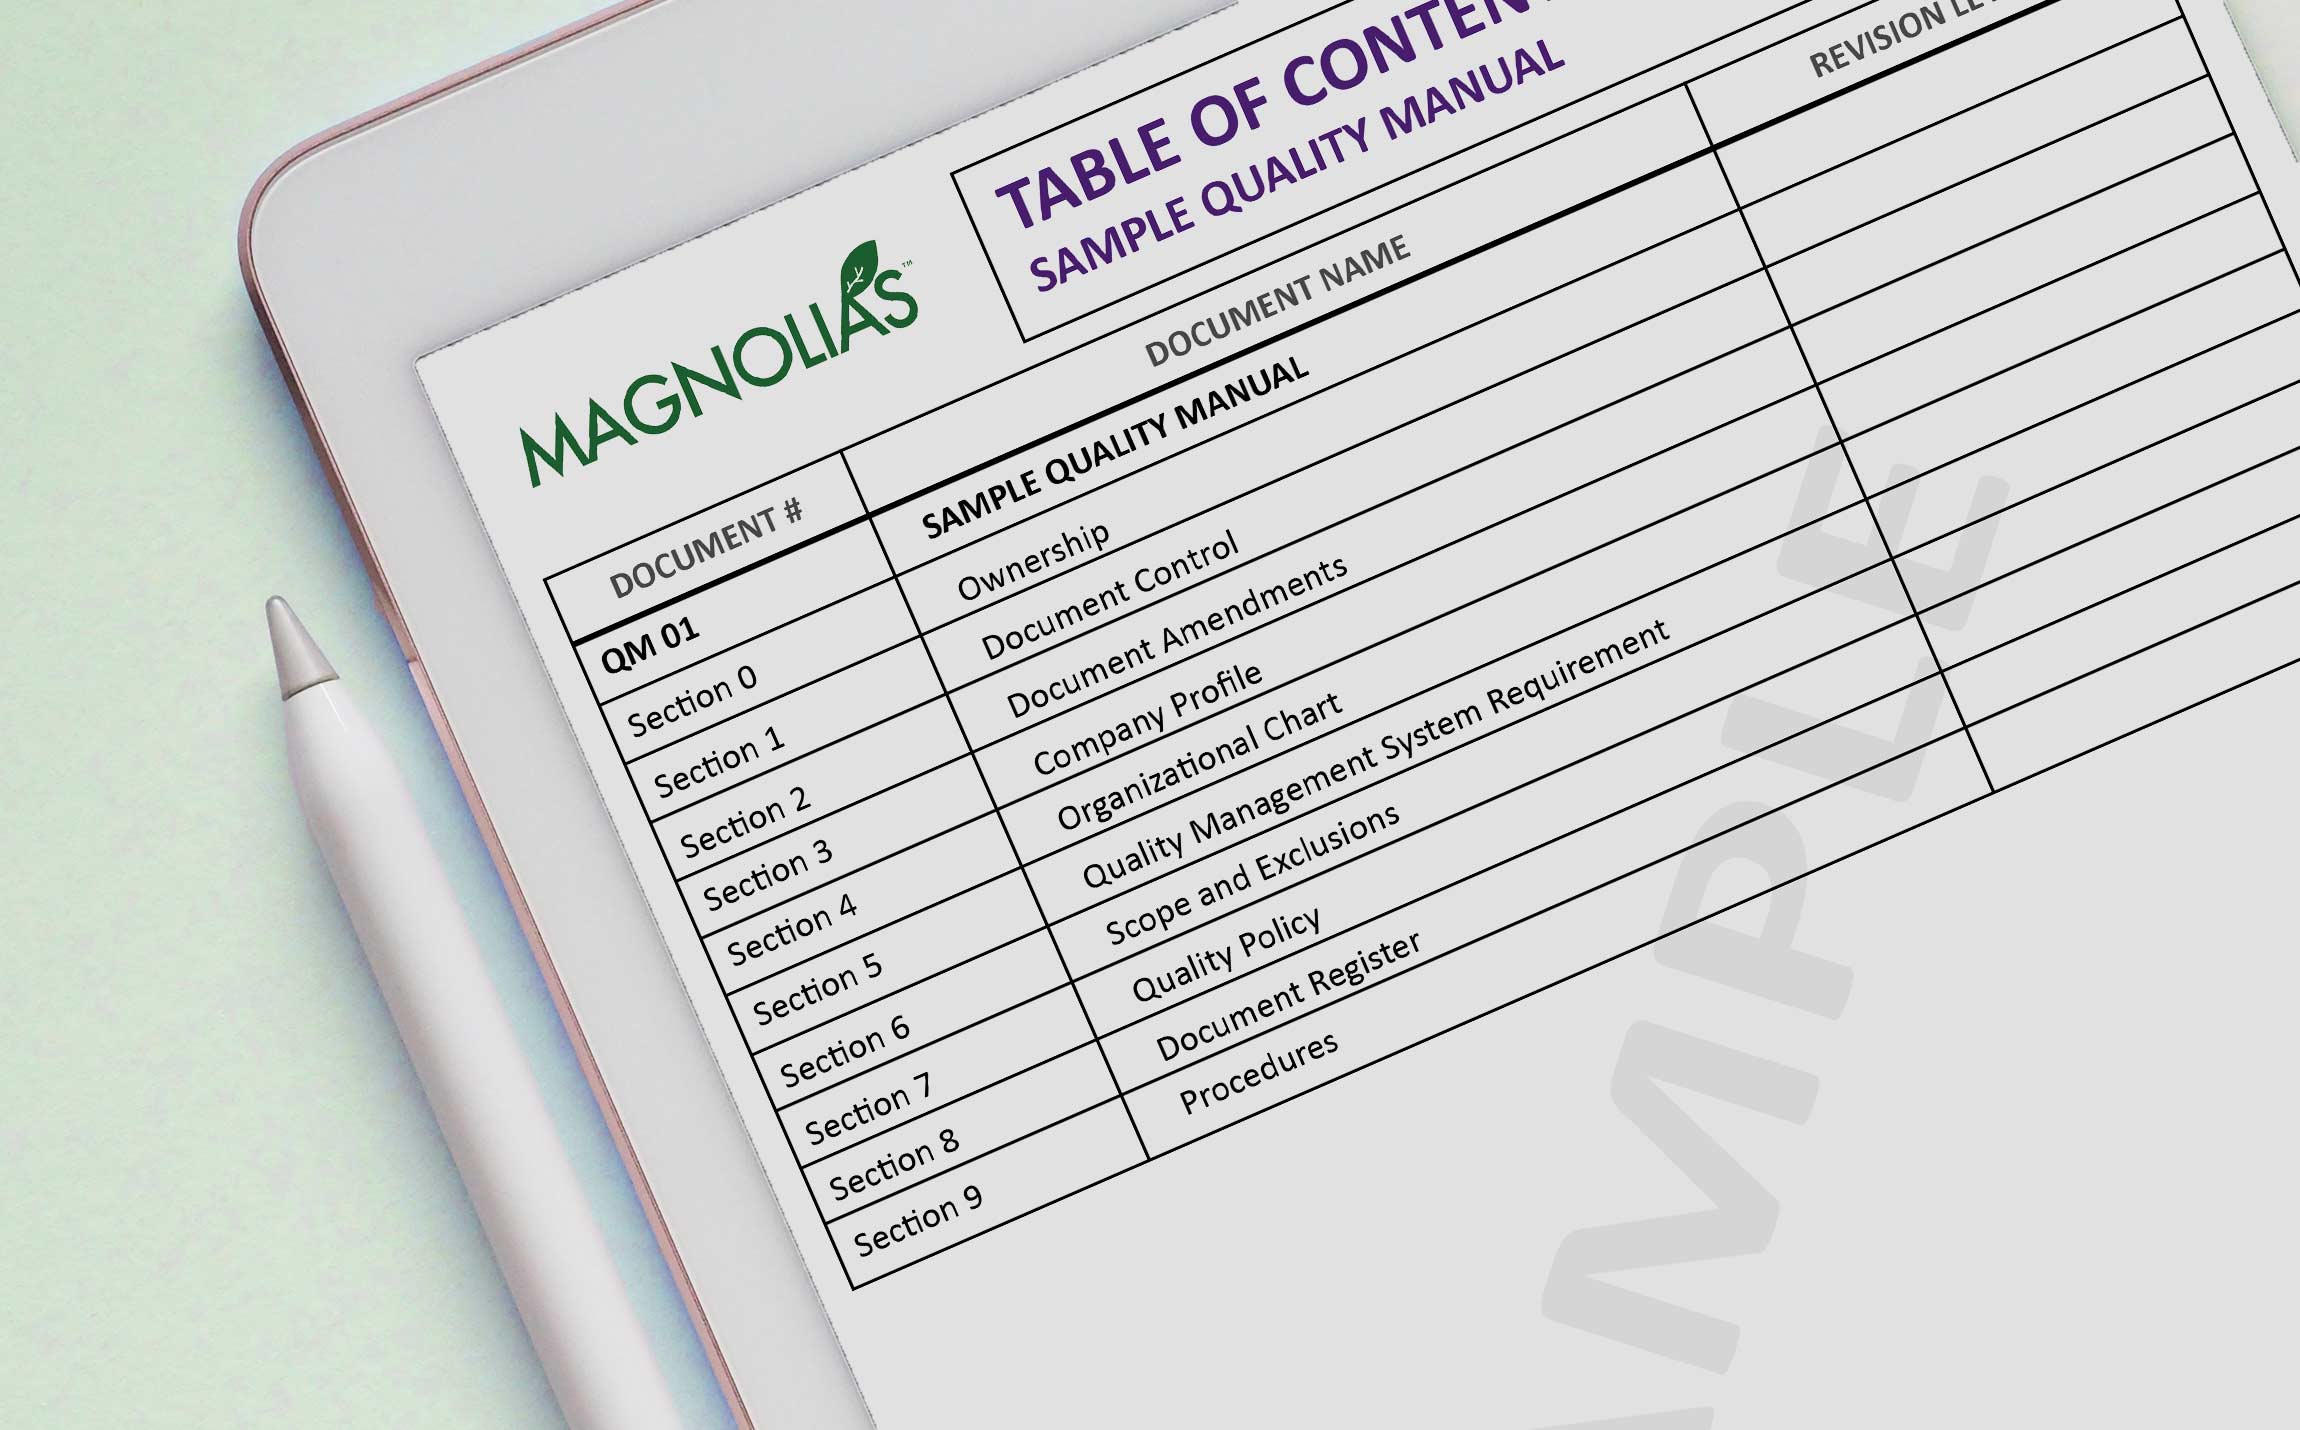 Download a free quality management system table of contents to help you build your quality system.